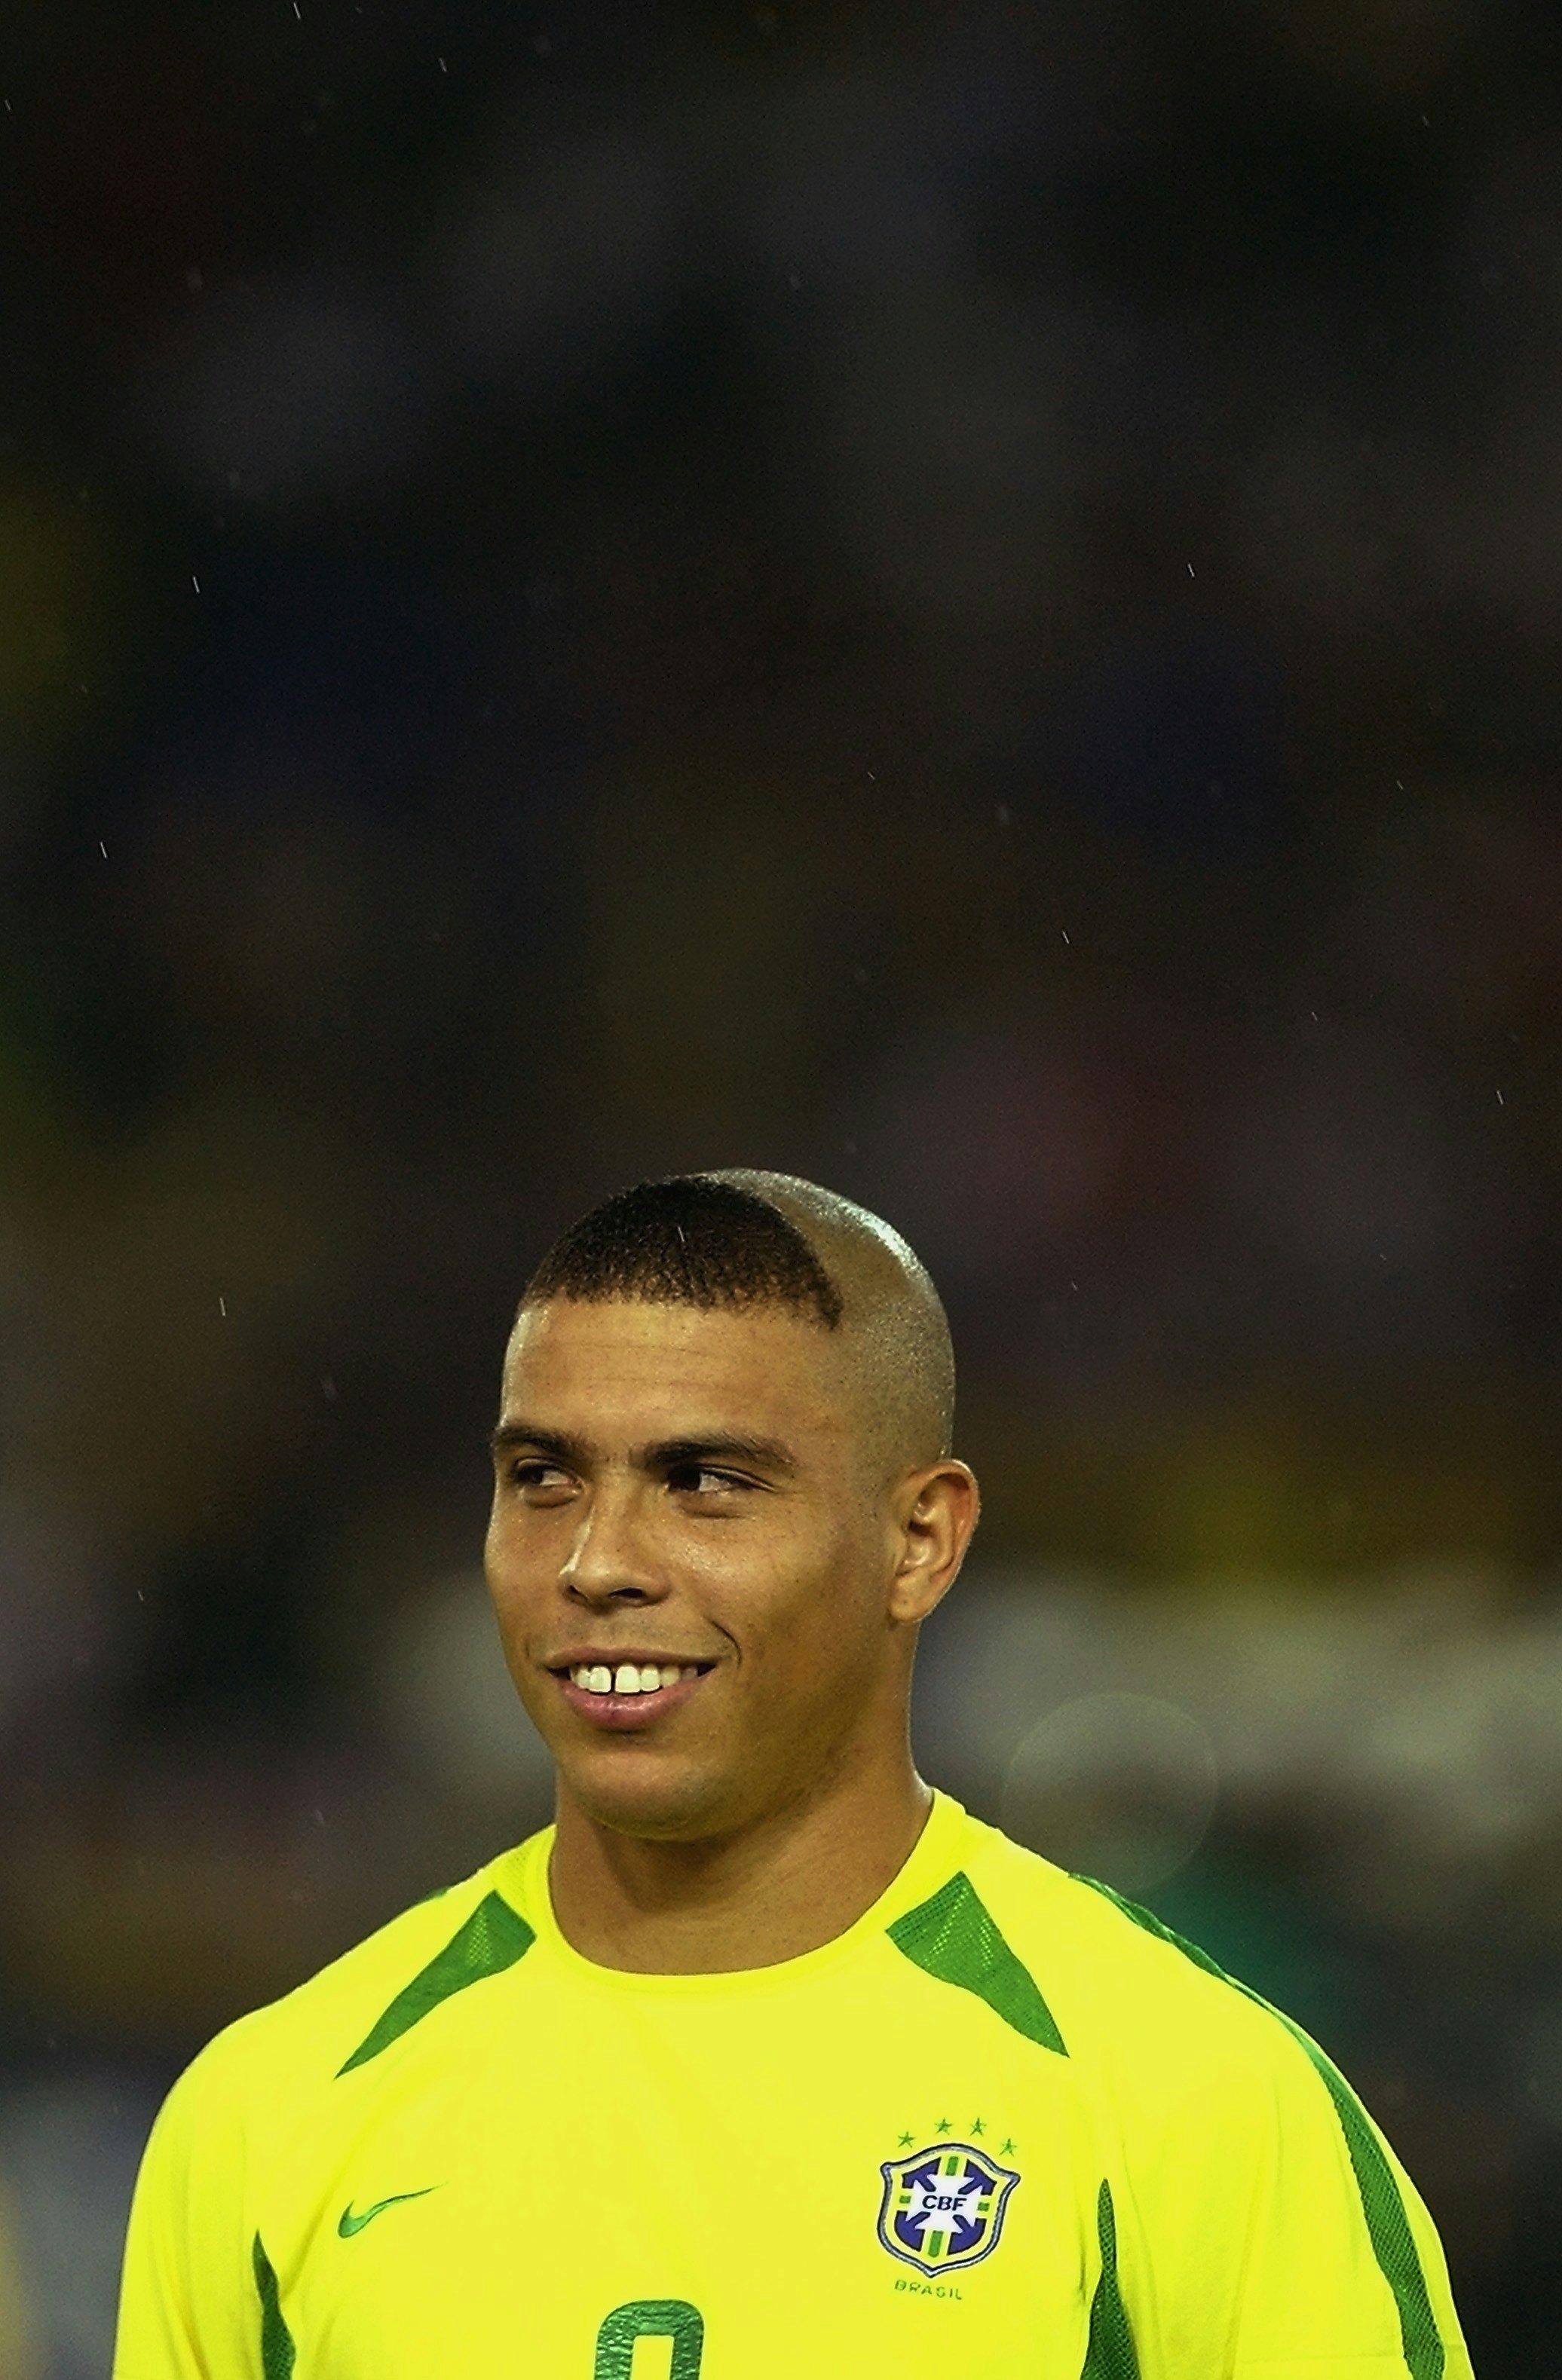 7 Arsenal players haircuts you should try - Our Blog